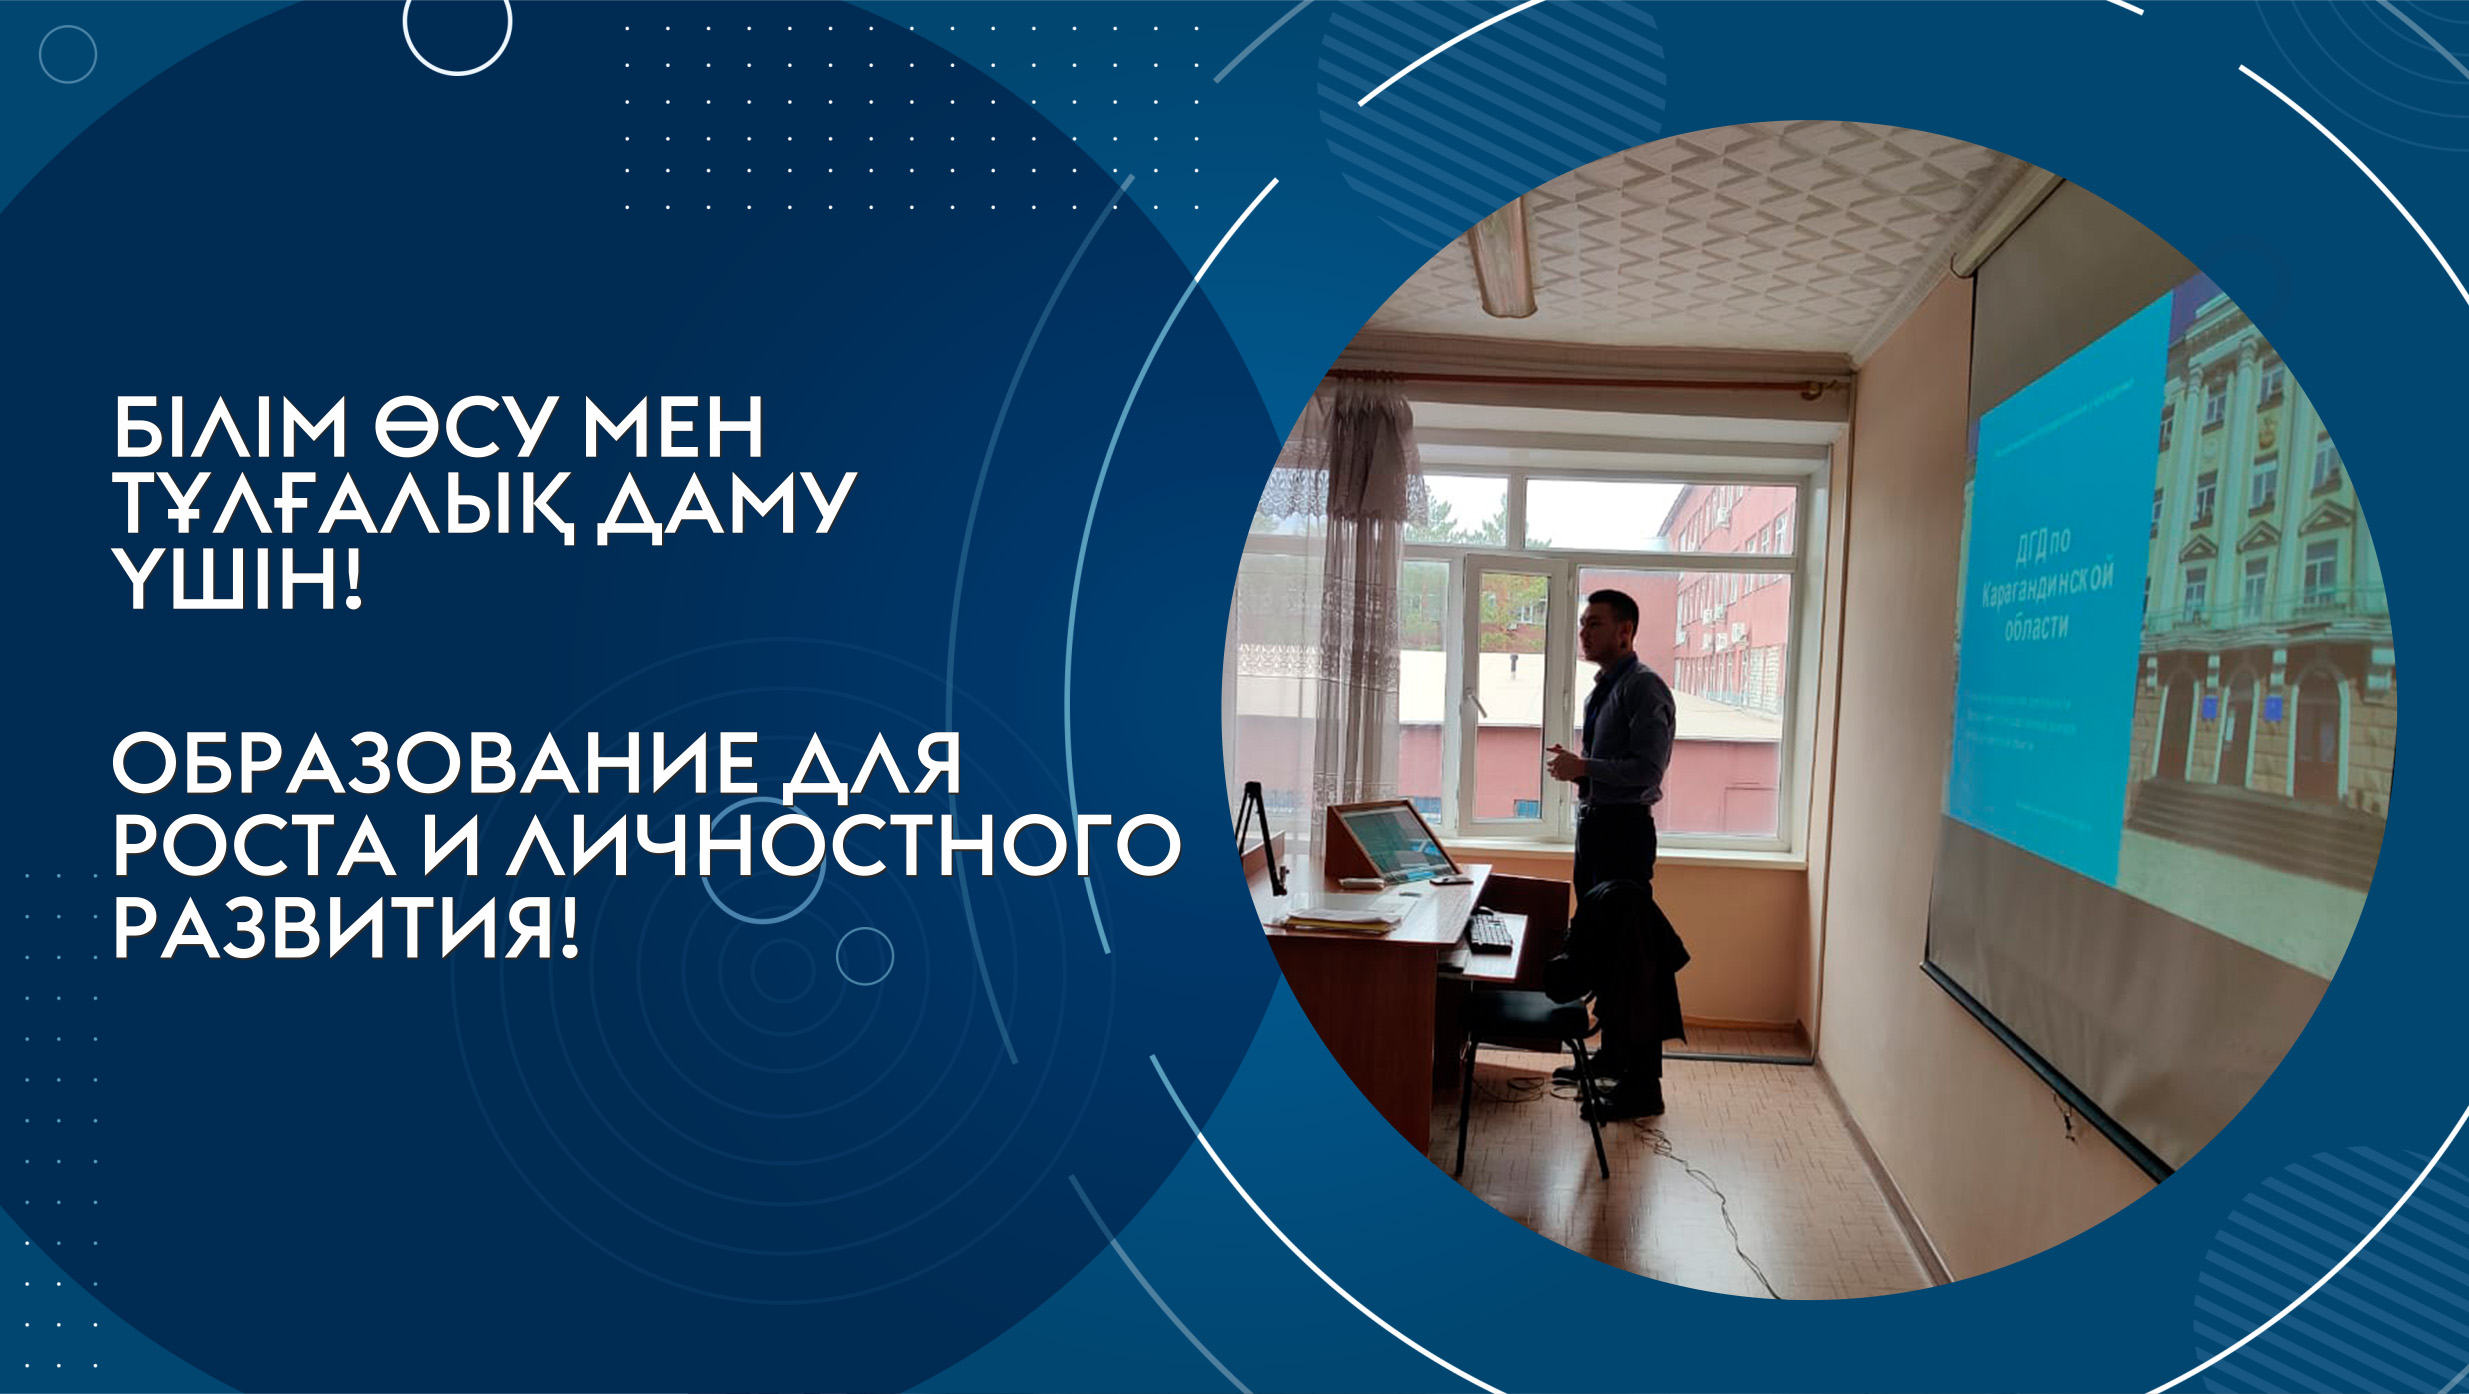 Cooperation of the Department of Finance with the DGІ of Karaganda